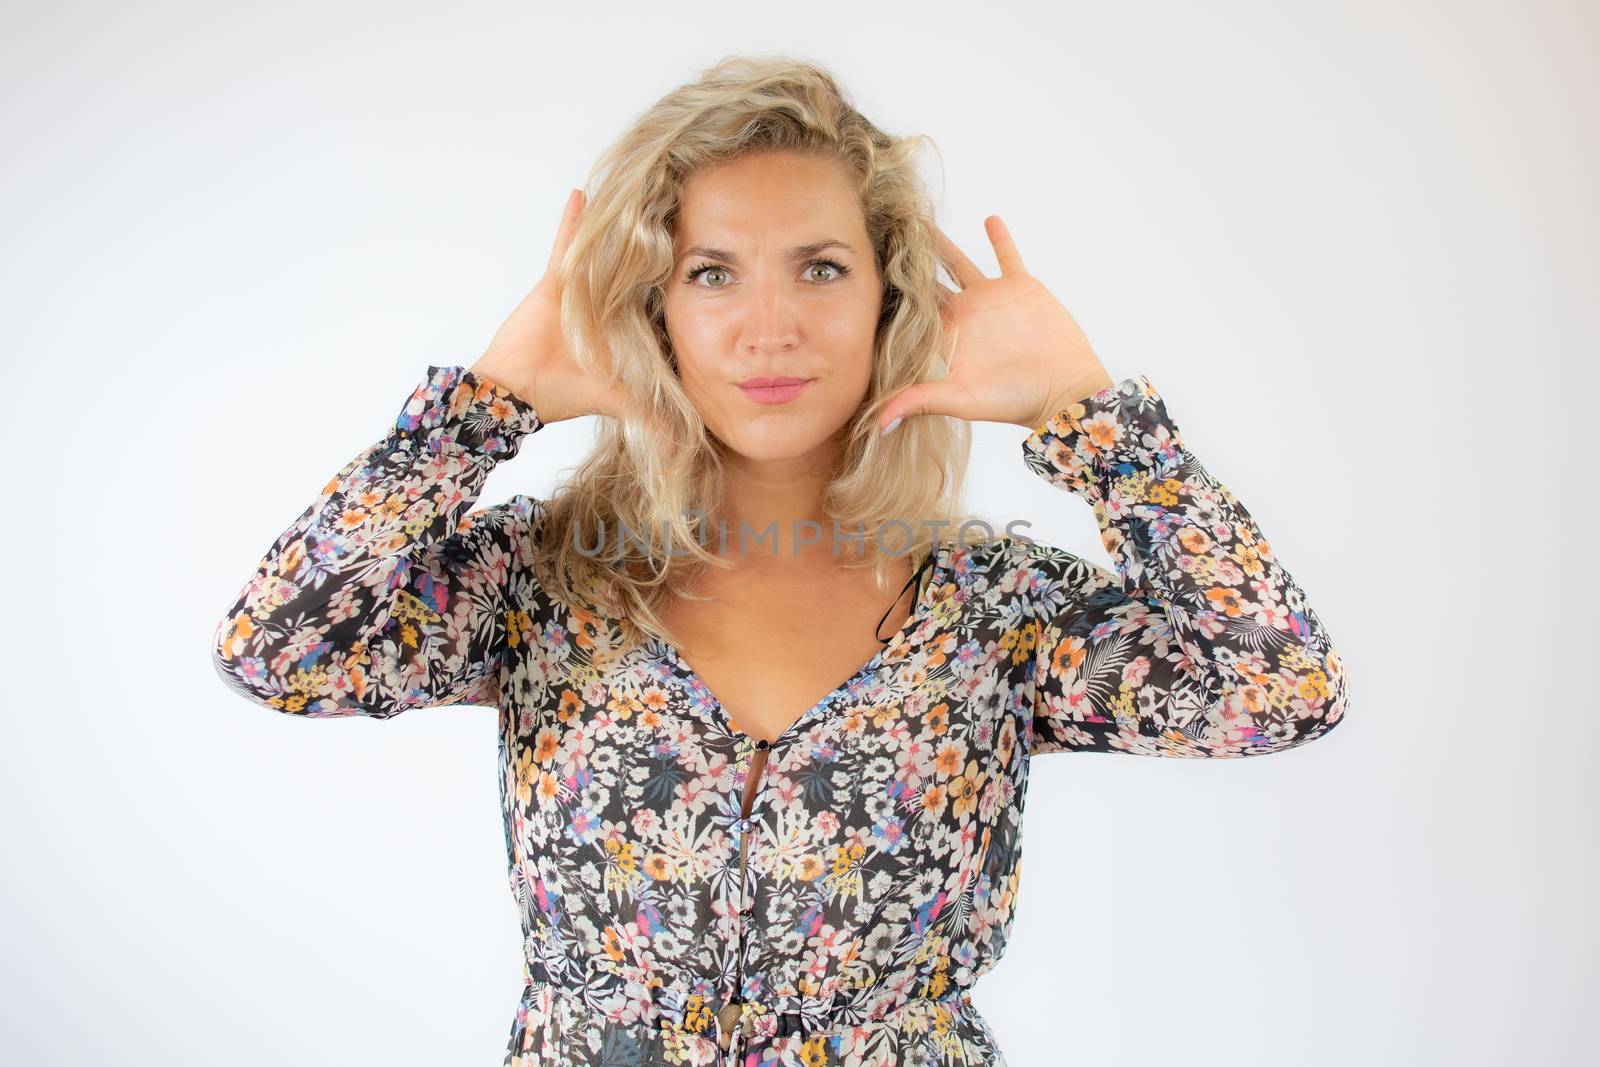 Pretty blonde woman in a flowery dress gesturing on white background